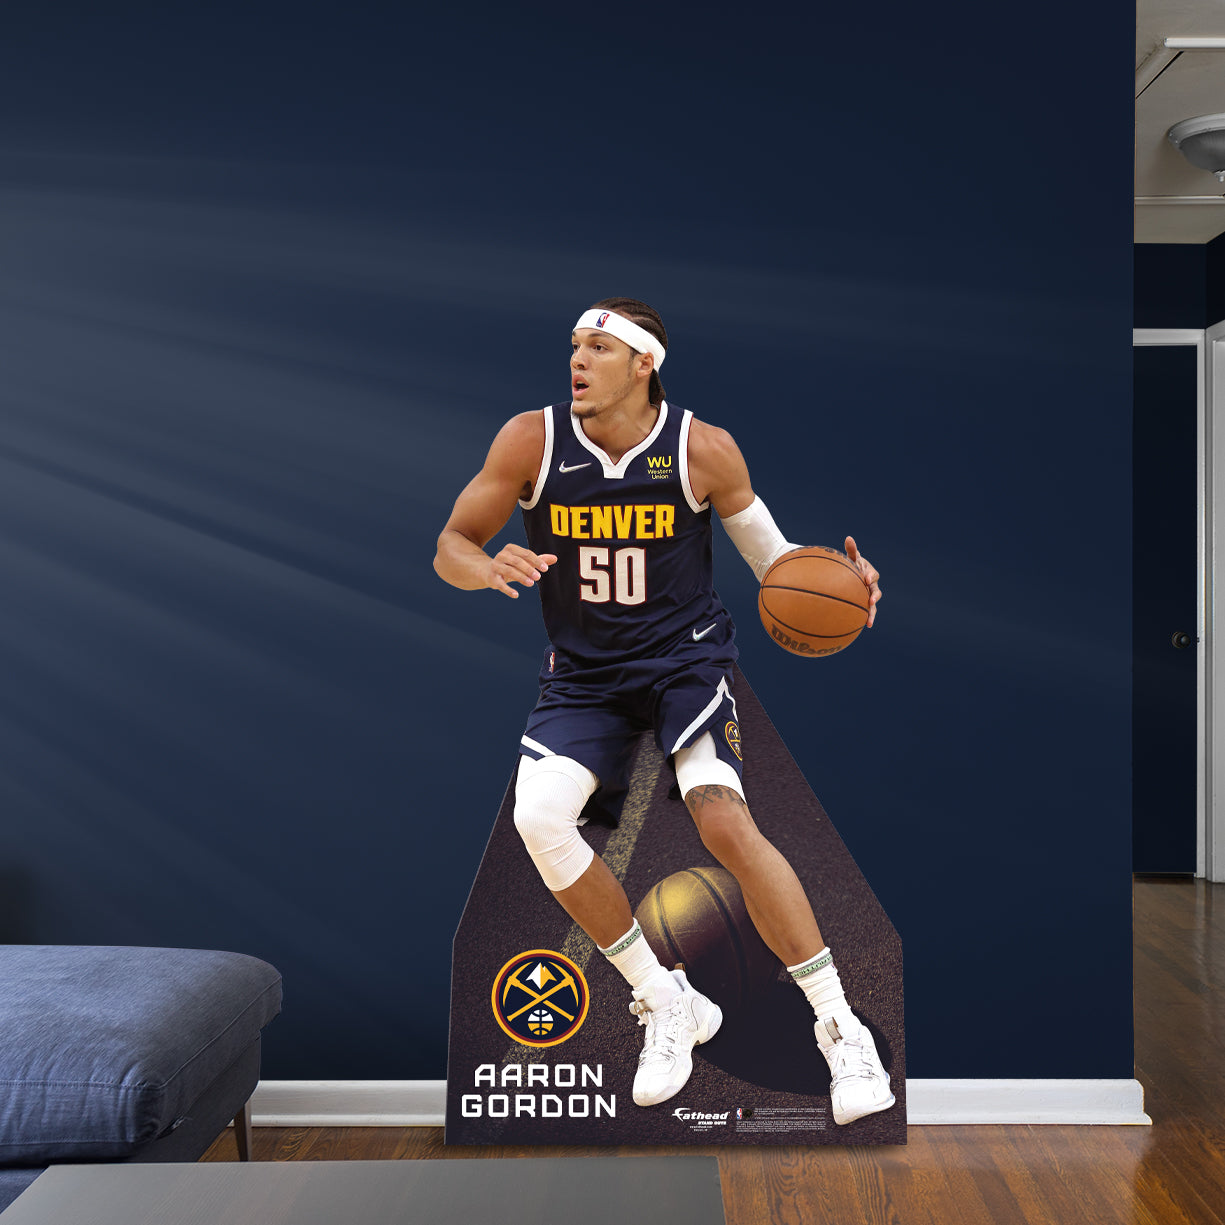 Denver Nuggets: Aaron Gordon 2022  Life-Size   Foam Core Cutout  - Officially Licensed NBA    Stand Out